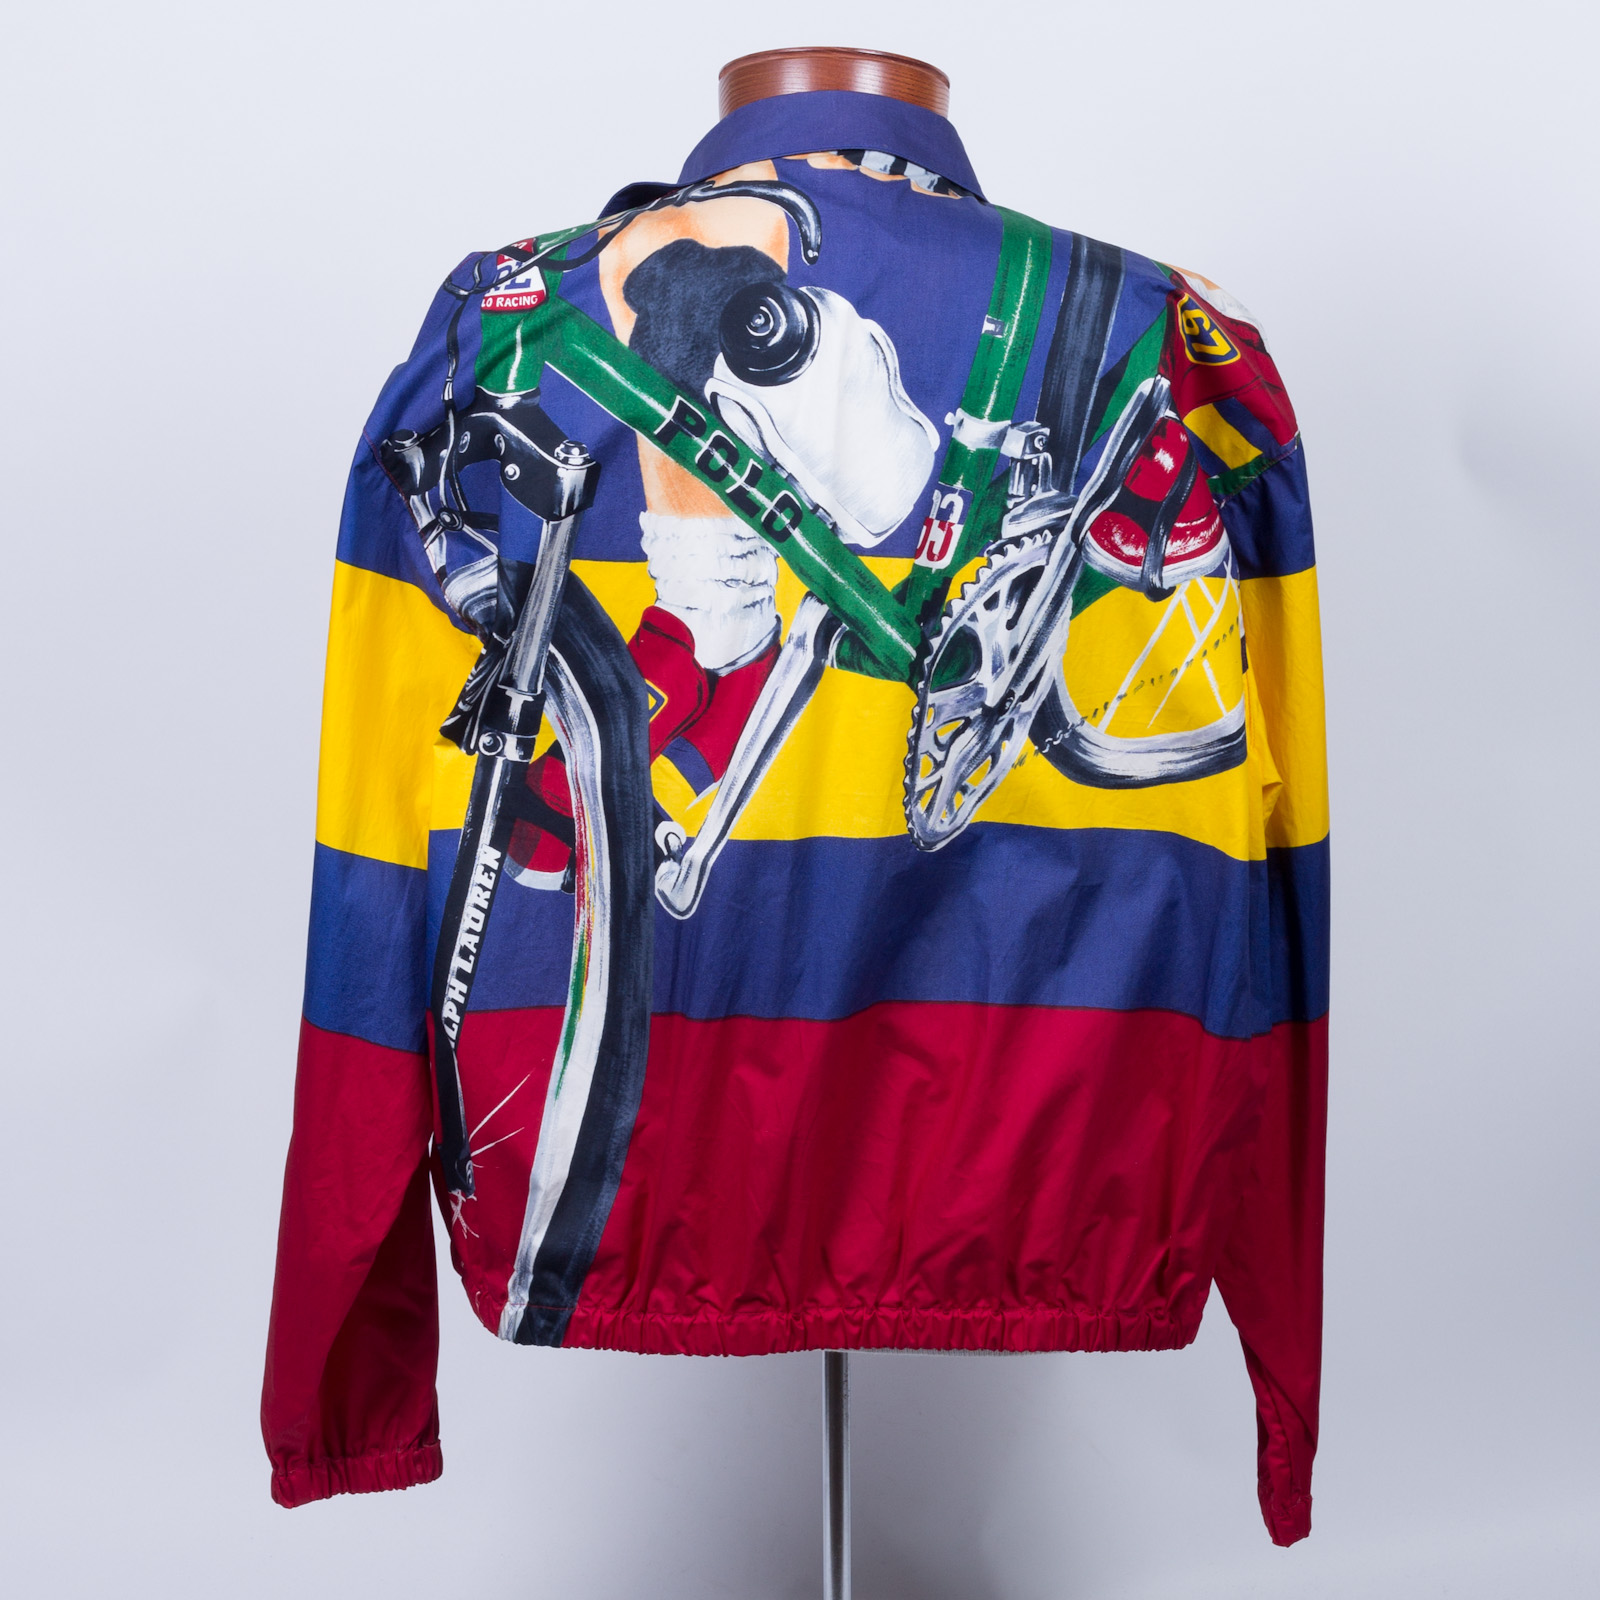 File:Vintage cycle print racing jacket by Polo Ralph Lauren